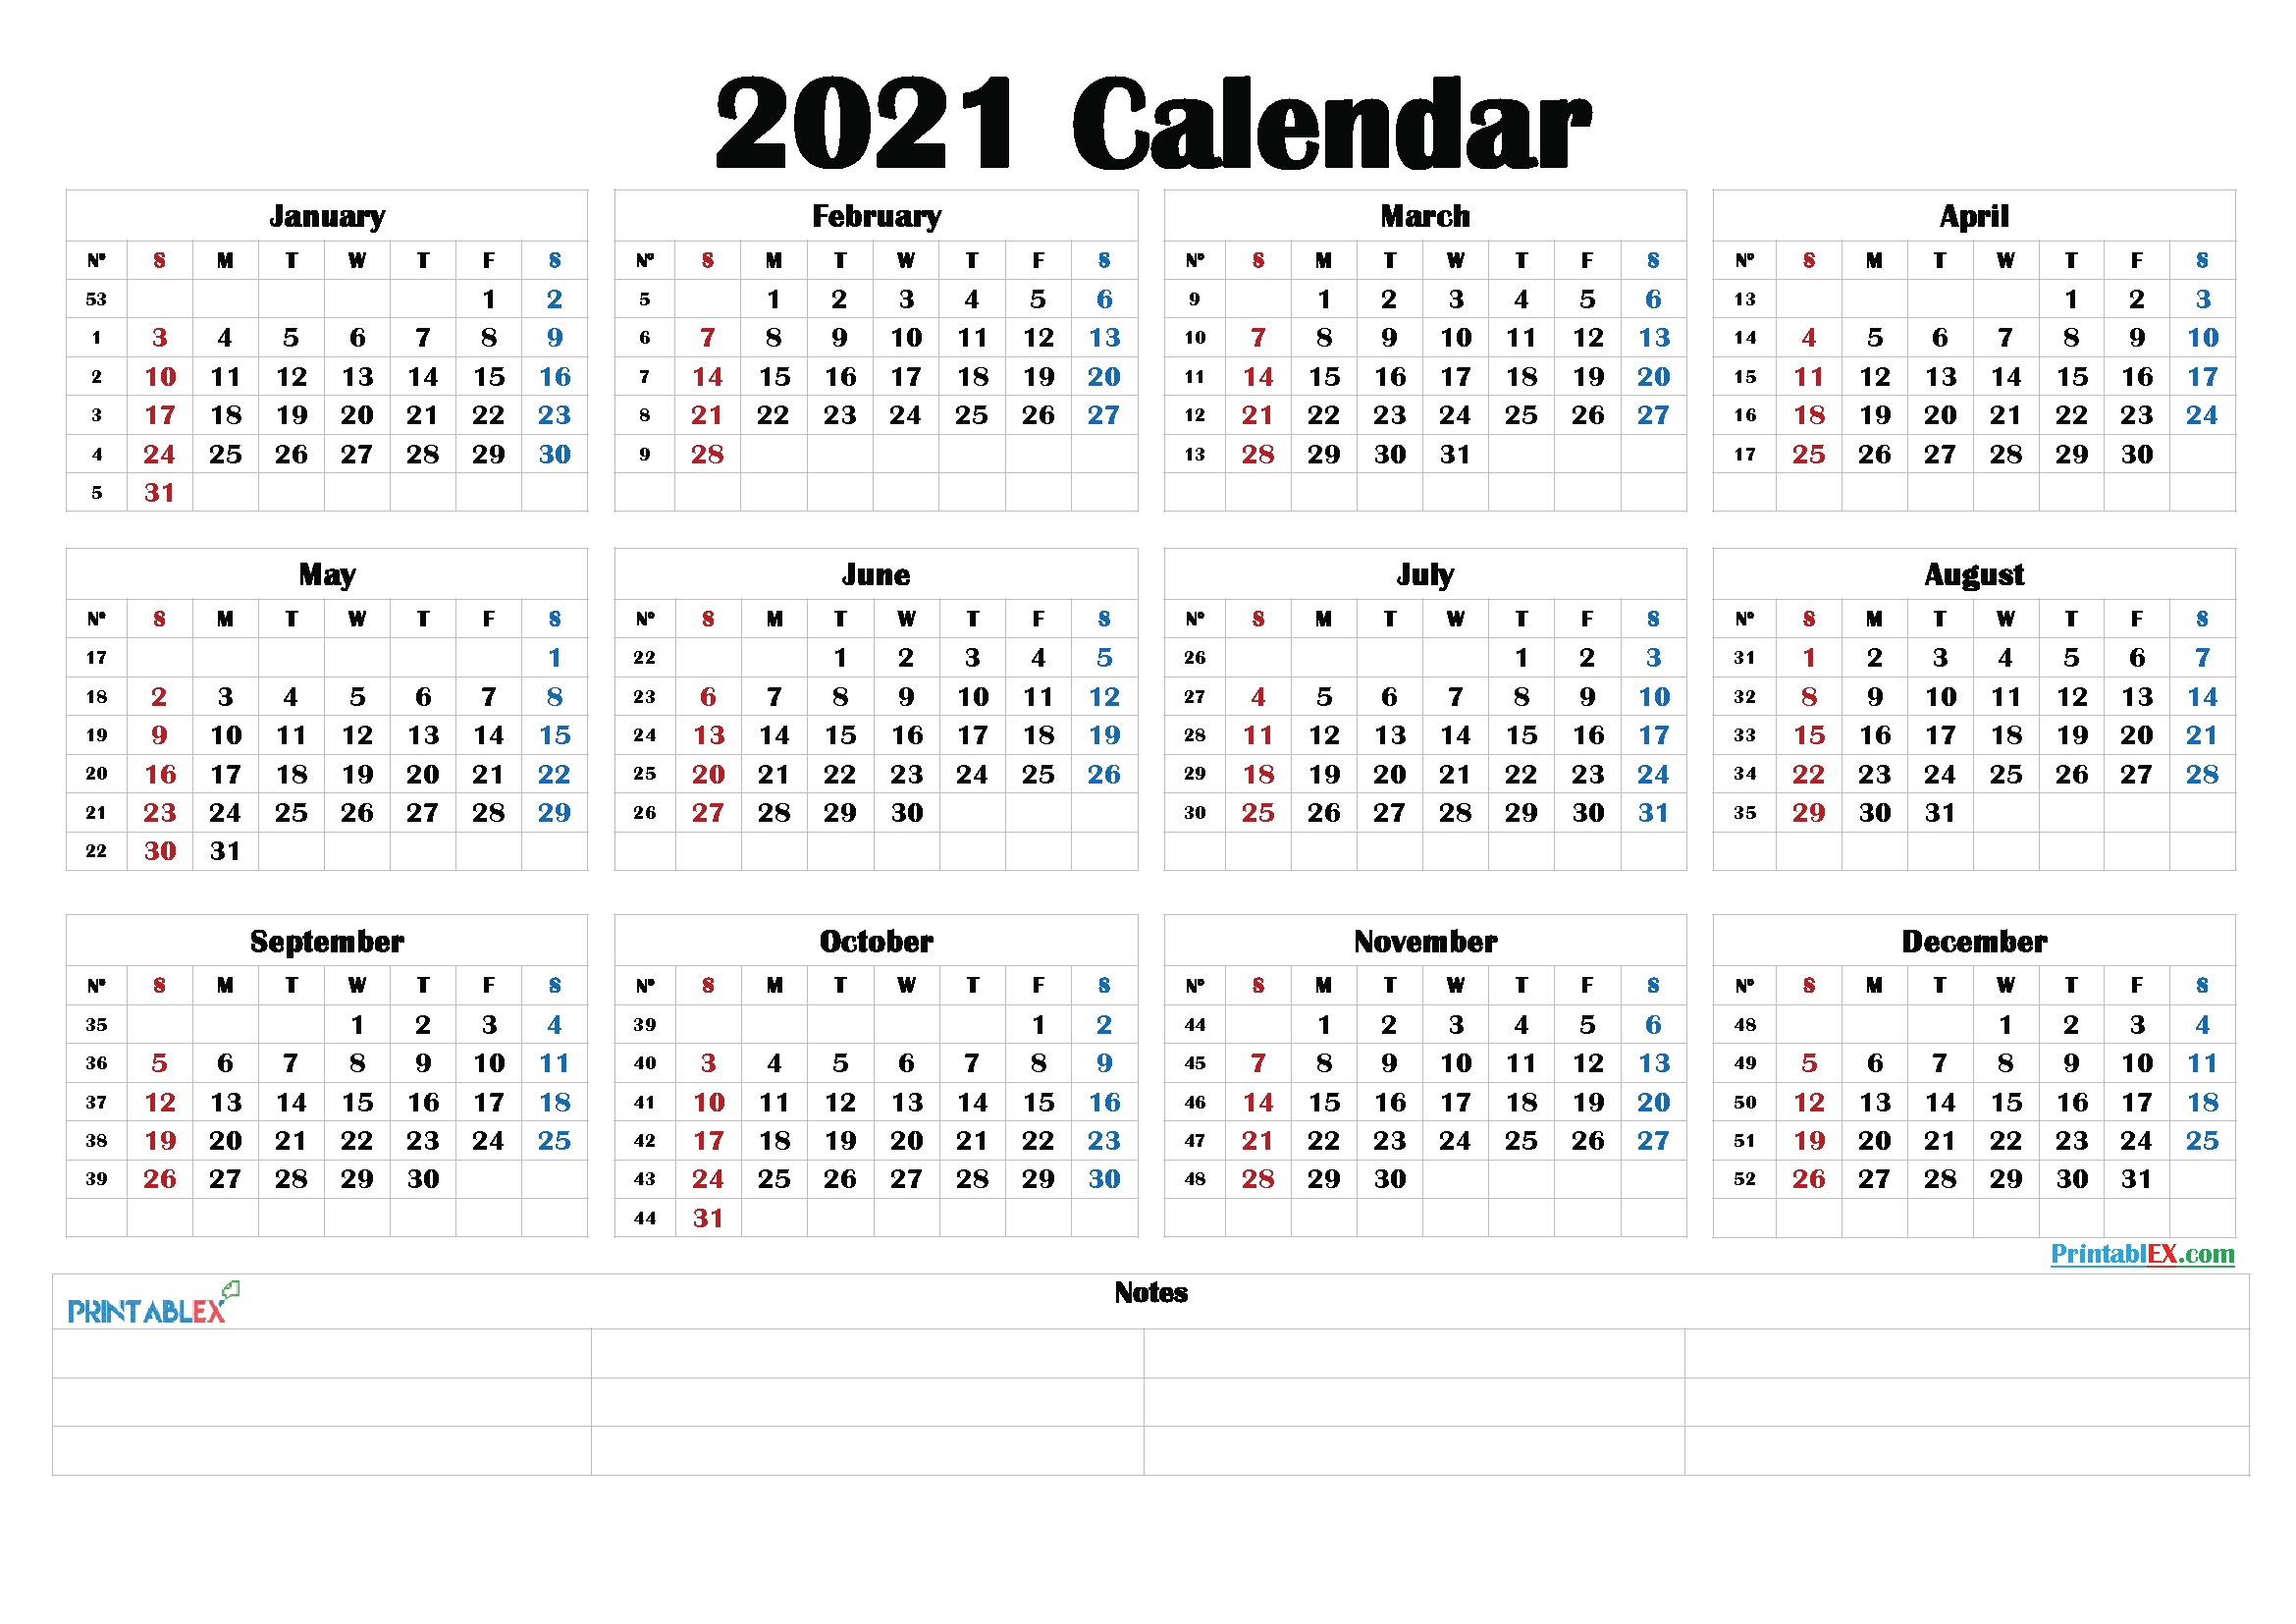 Free 2021 Yearly Calender Template : 2021 Printable Yearly